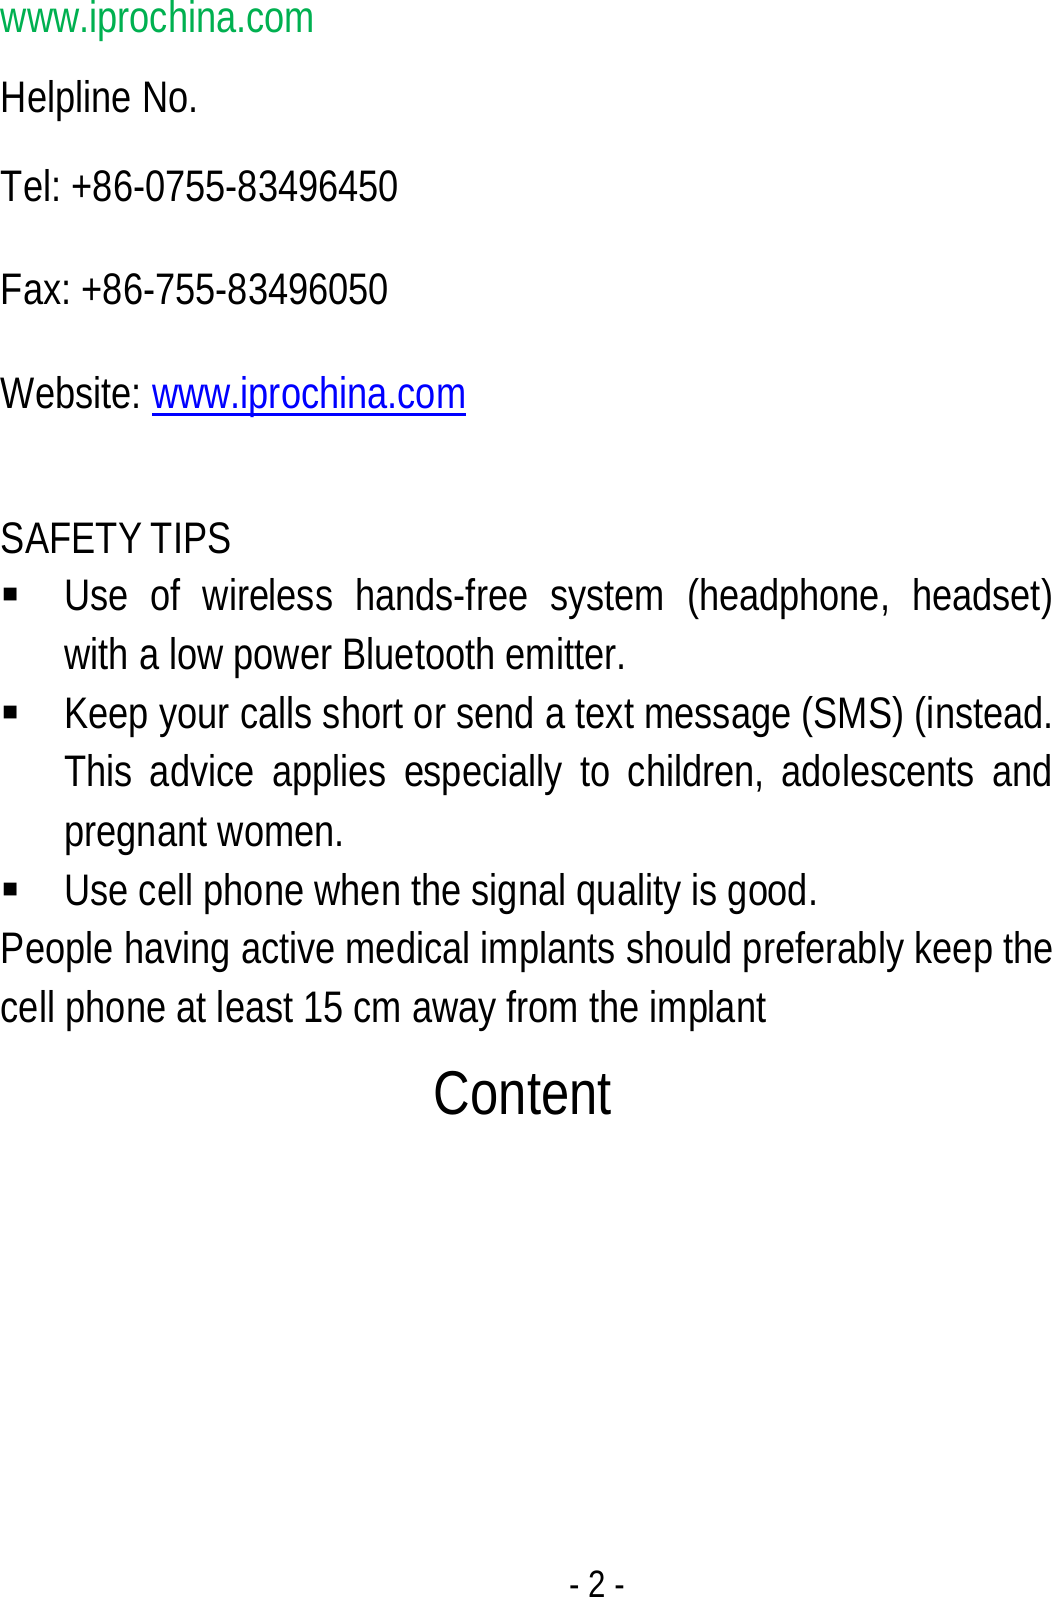  - 2 - www.iprochina.com Helpline No.   Tel: +86-0755-83496450 Fax: +86-755-83496050 Website: www.iprochina.com  SAFETY TIPS  Use of wireless hands-free system (headphone, headset) with a low power Bluetooth emitter.  Keep your calls short or send a text message (SMS) (instead. This advice applies especially to children, adolescents and pregnant women.  Use cell phone when the signal quality is good. People having active medical implants should preferably keep the cell phone at least 15 cm away from the implant  Content 